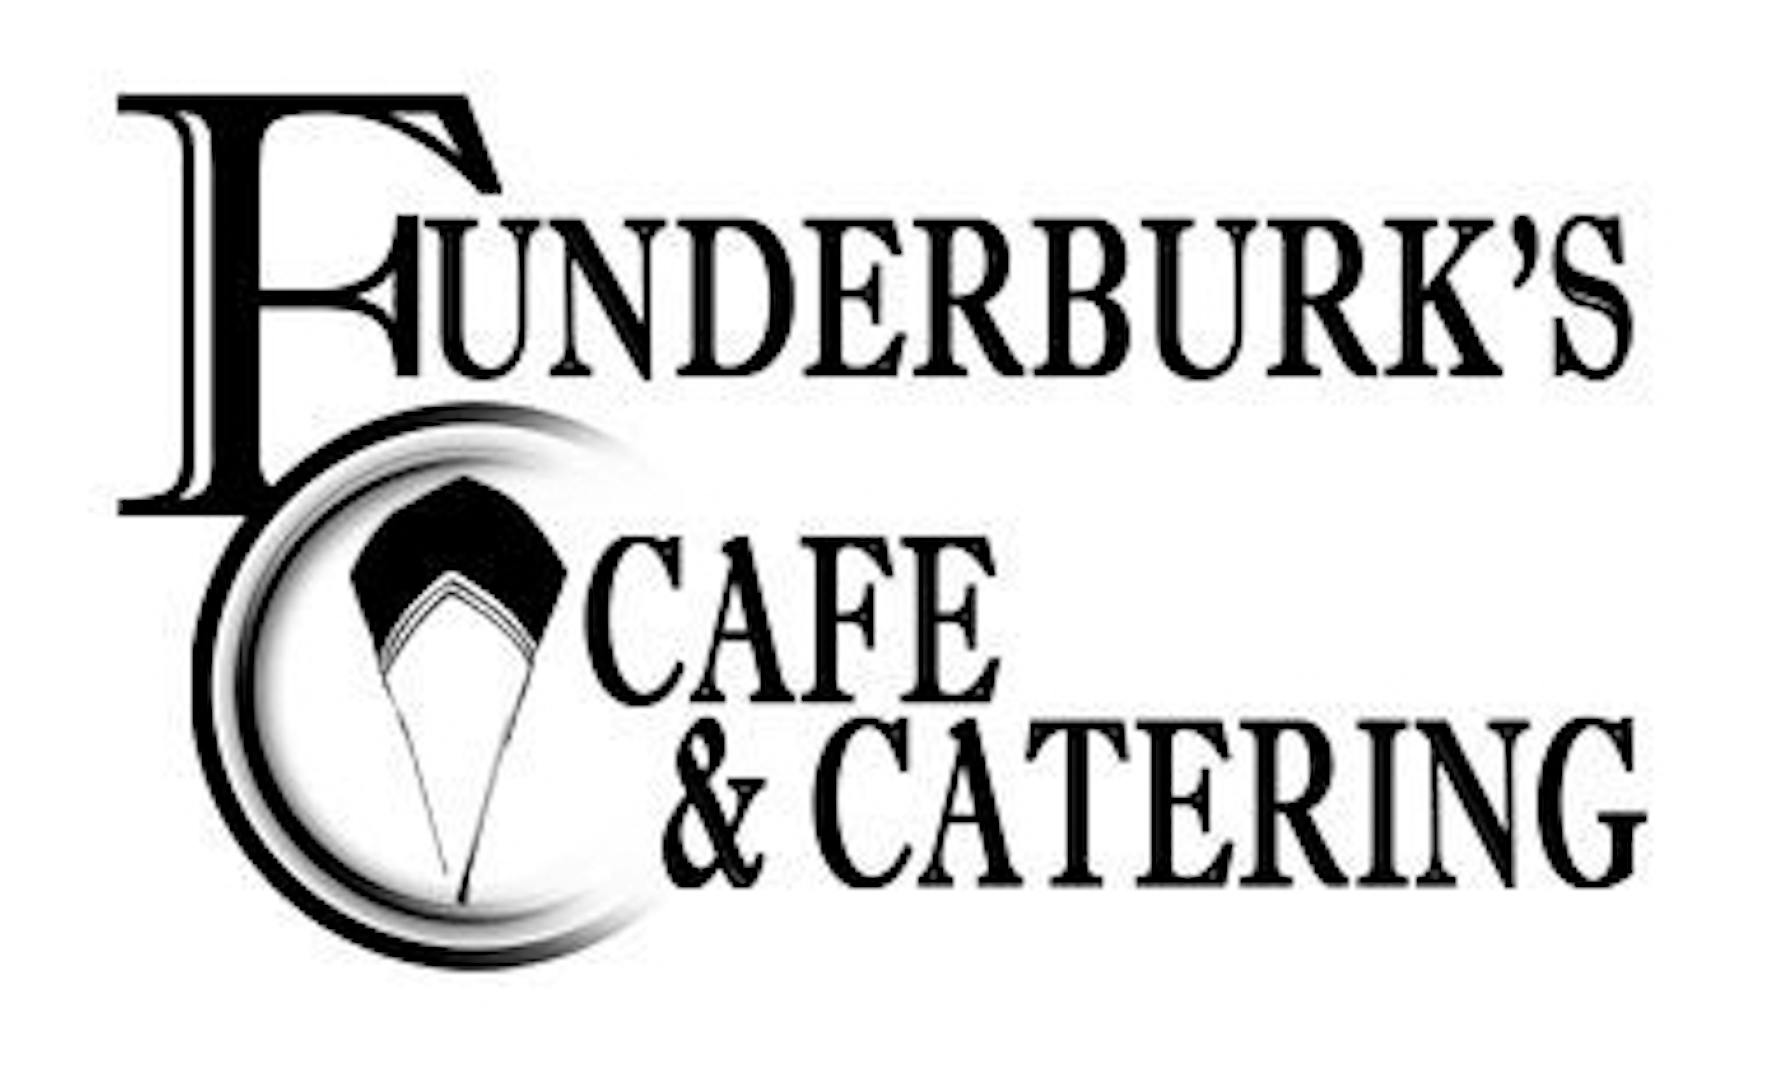 Funderburk's Cafe & Catering